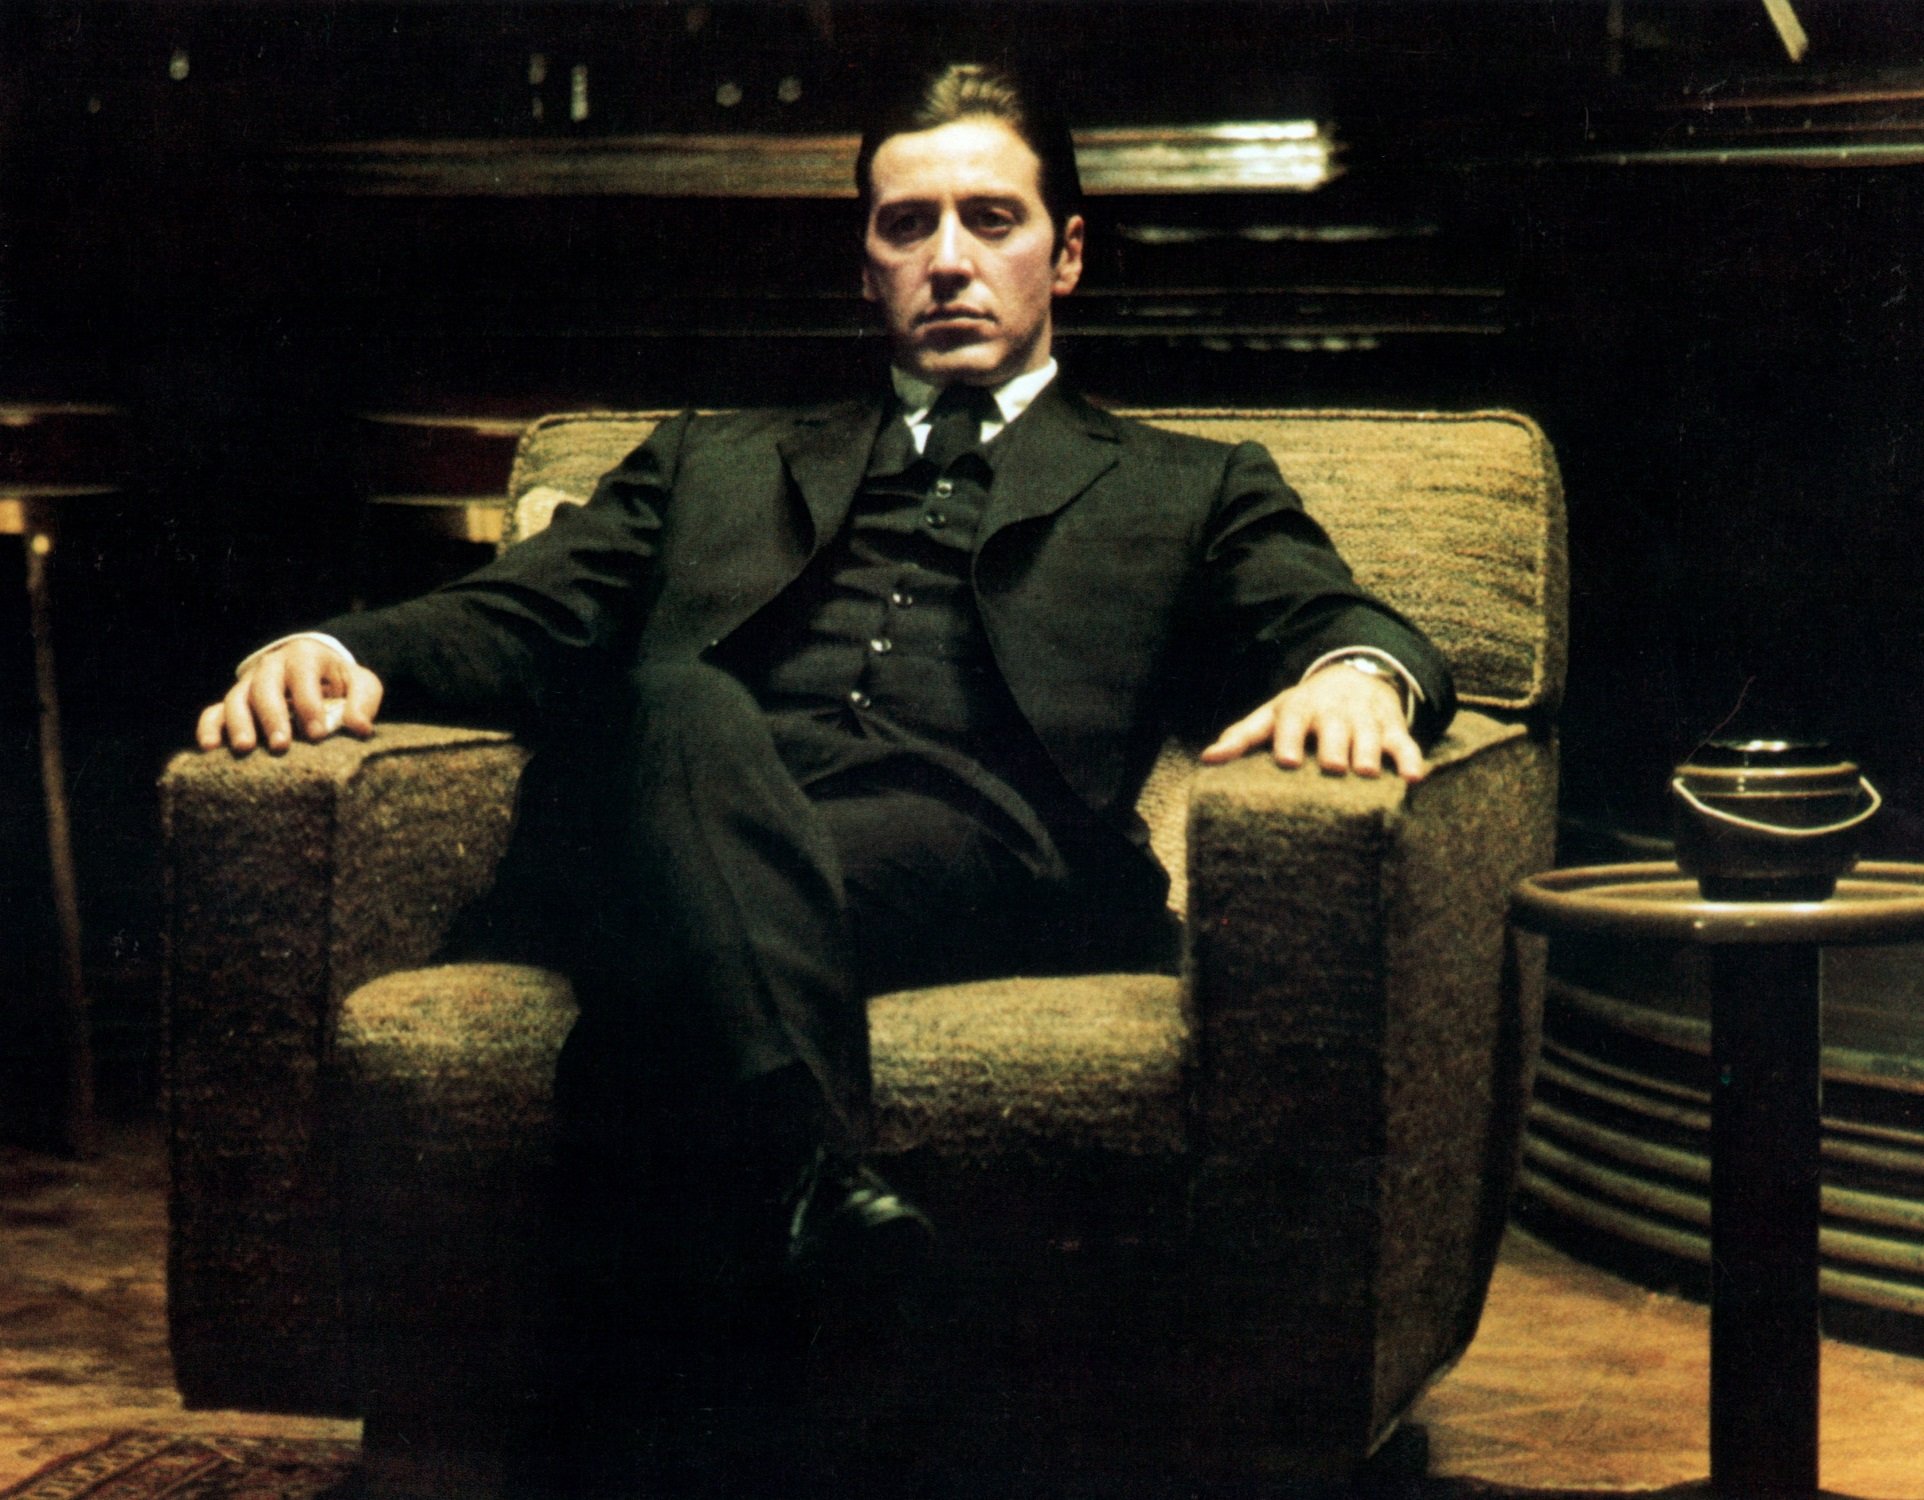 Al Pacino sits in a chair in a scene from the film 'The Godfather: Part II',